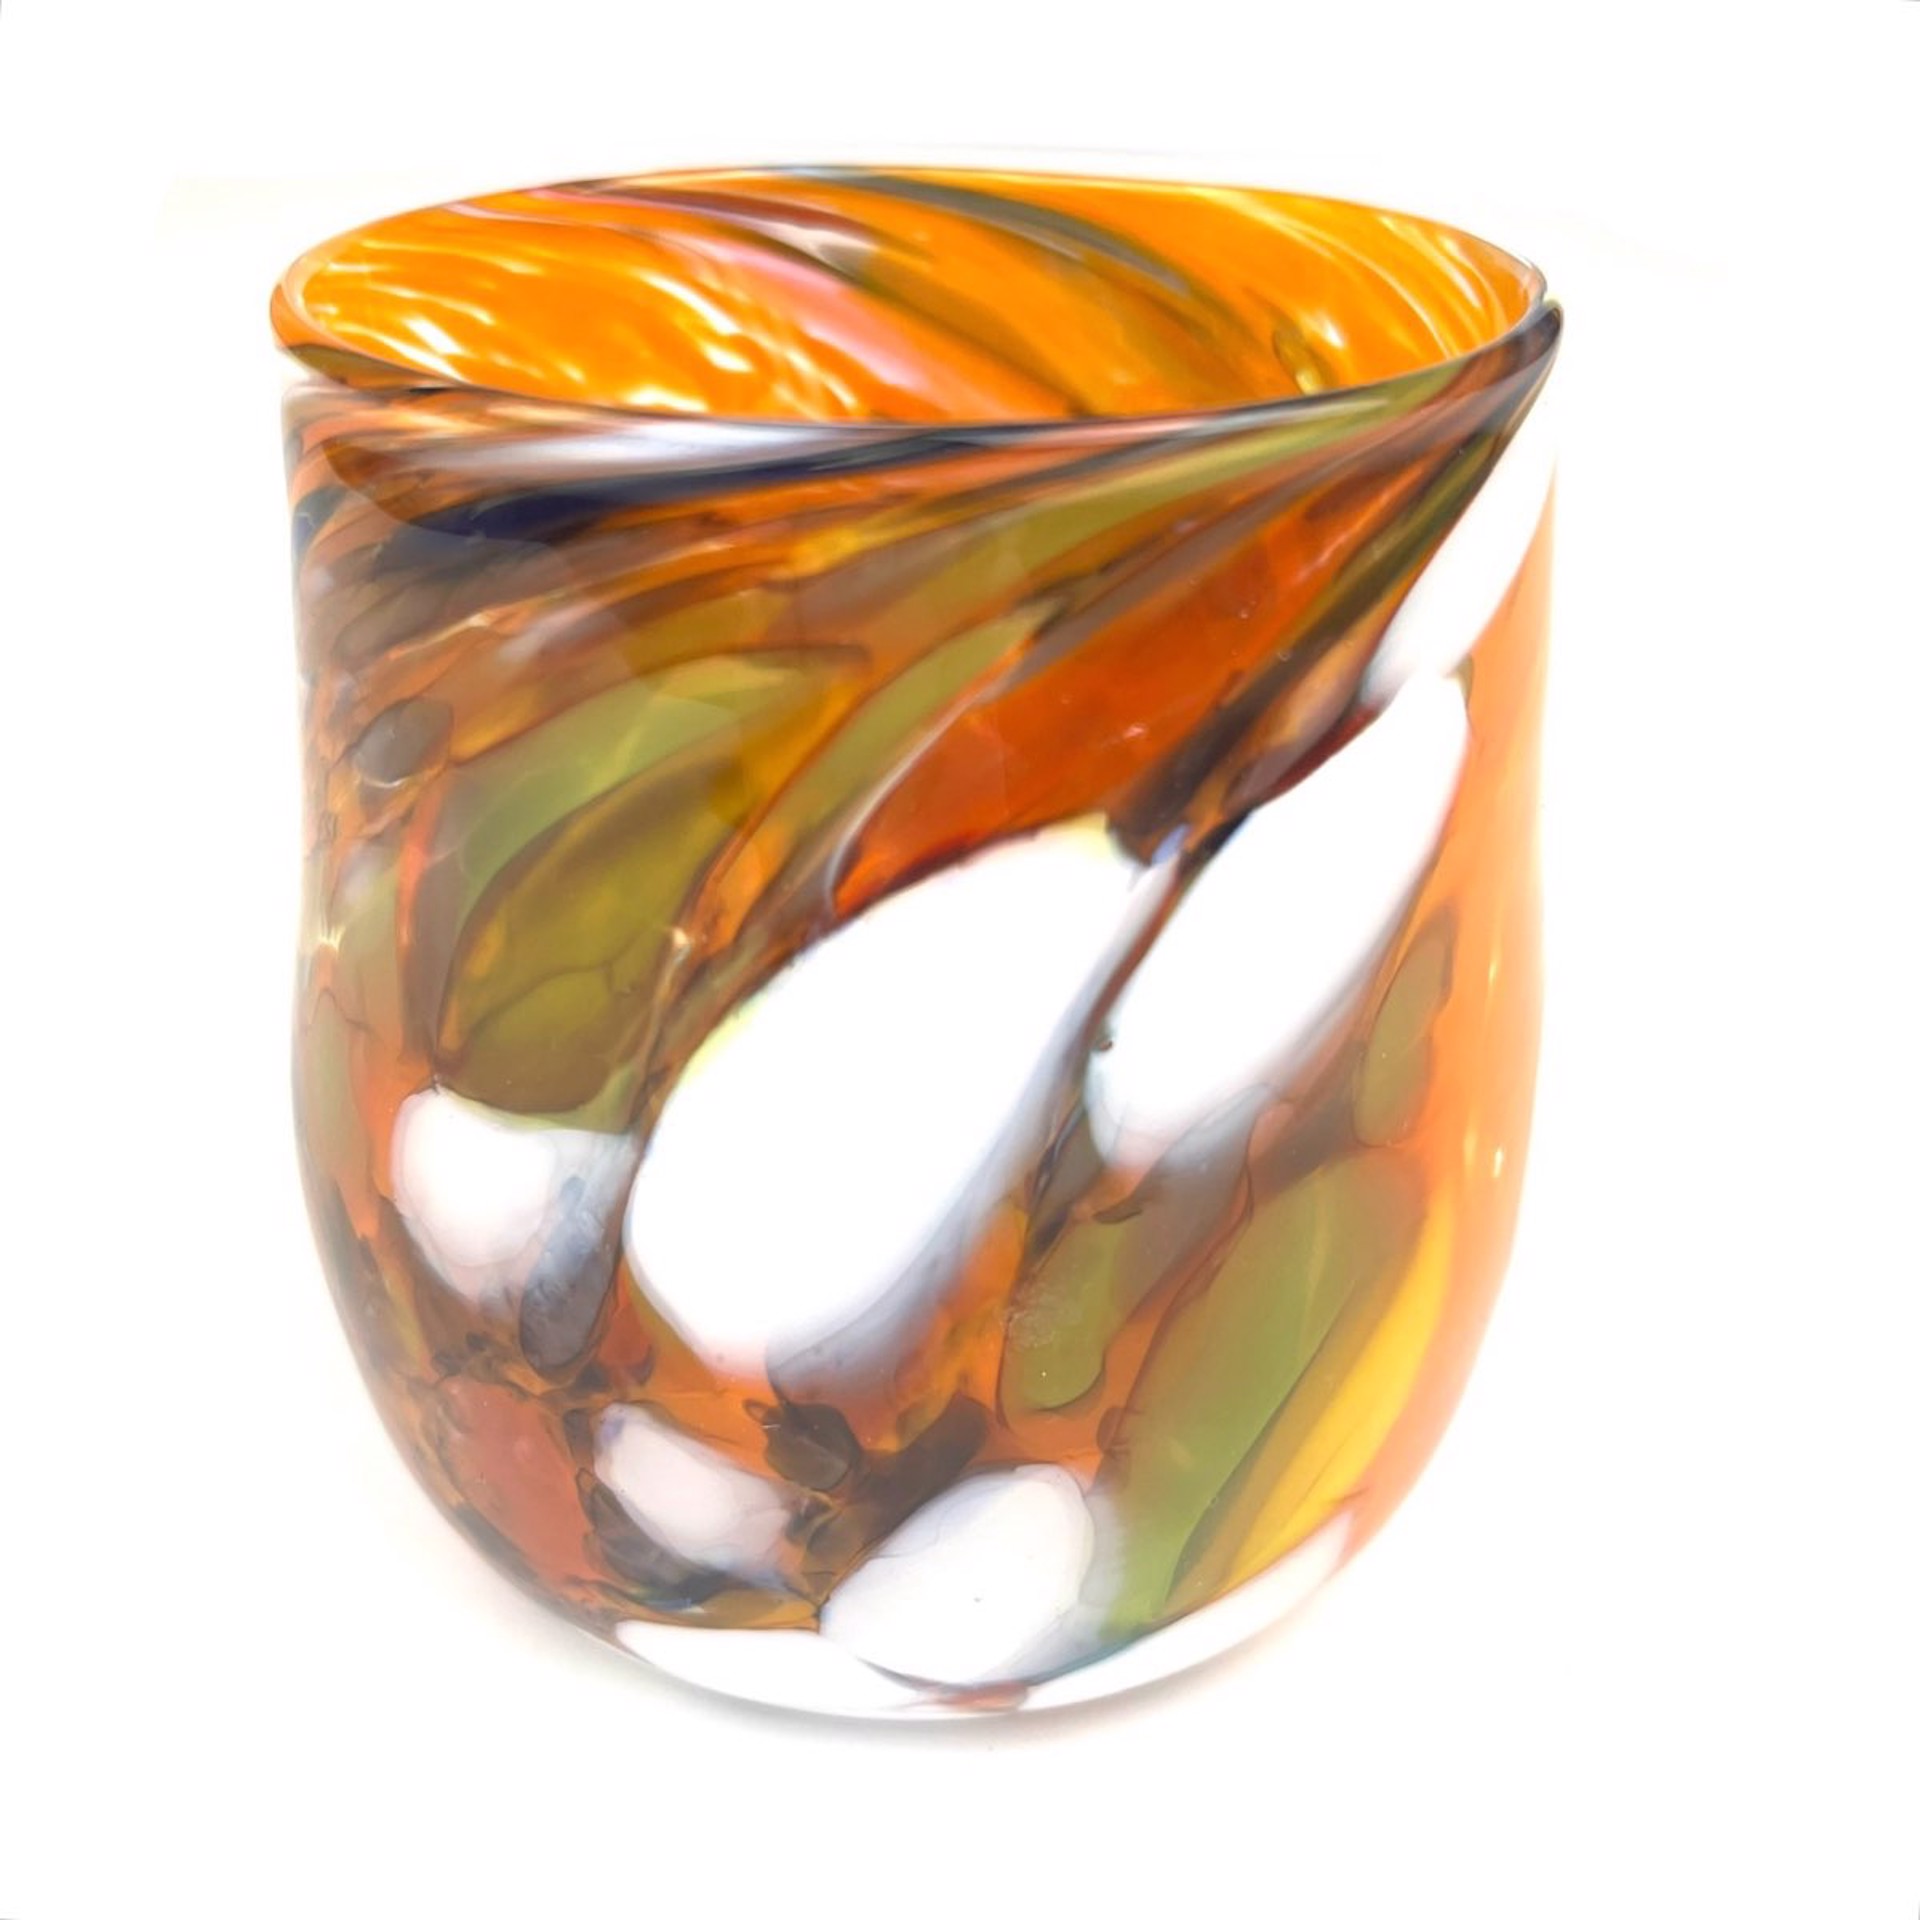 Stemless Wine Glass by Chad Balster